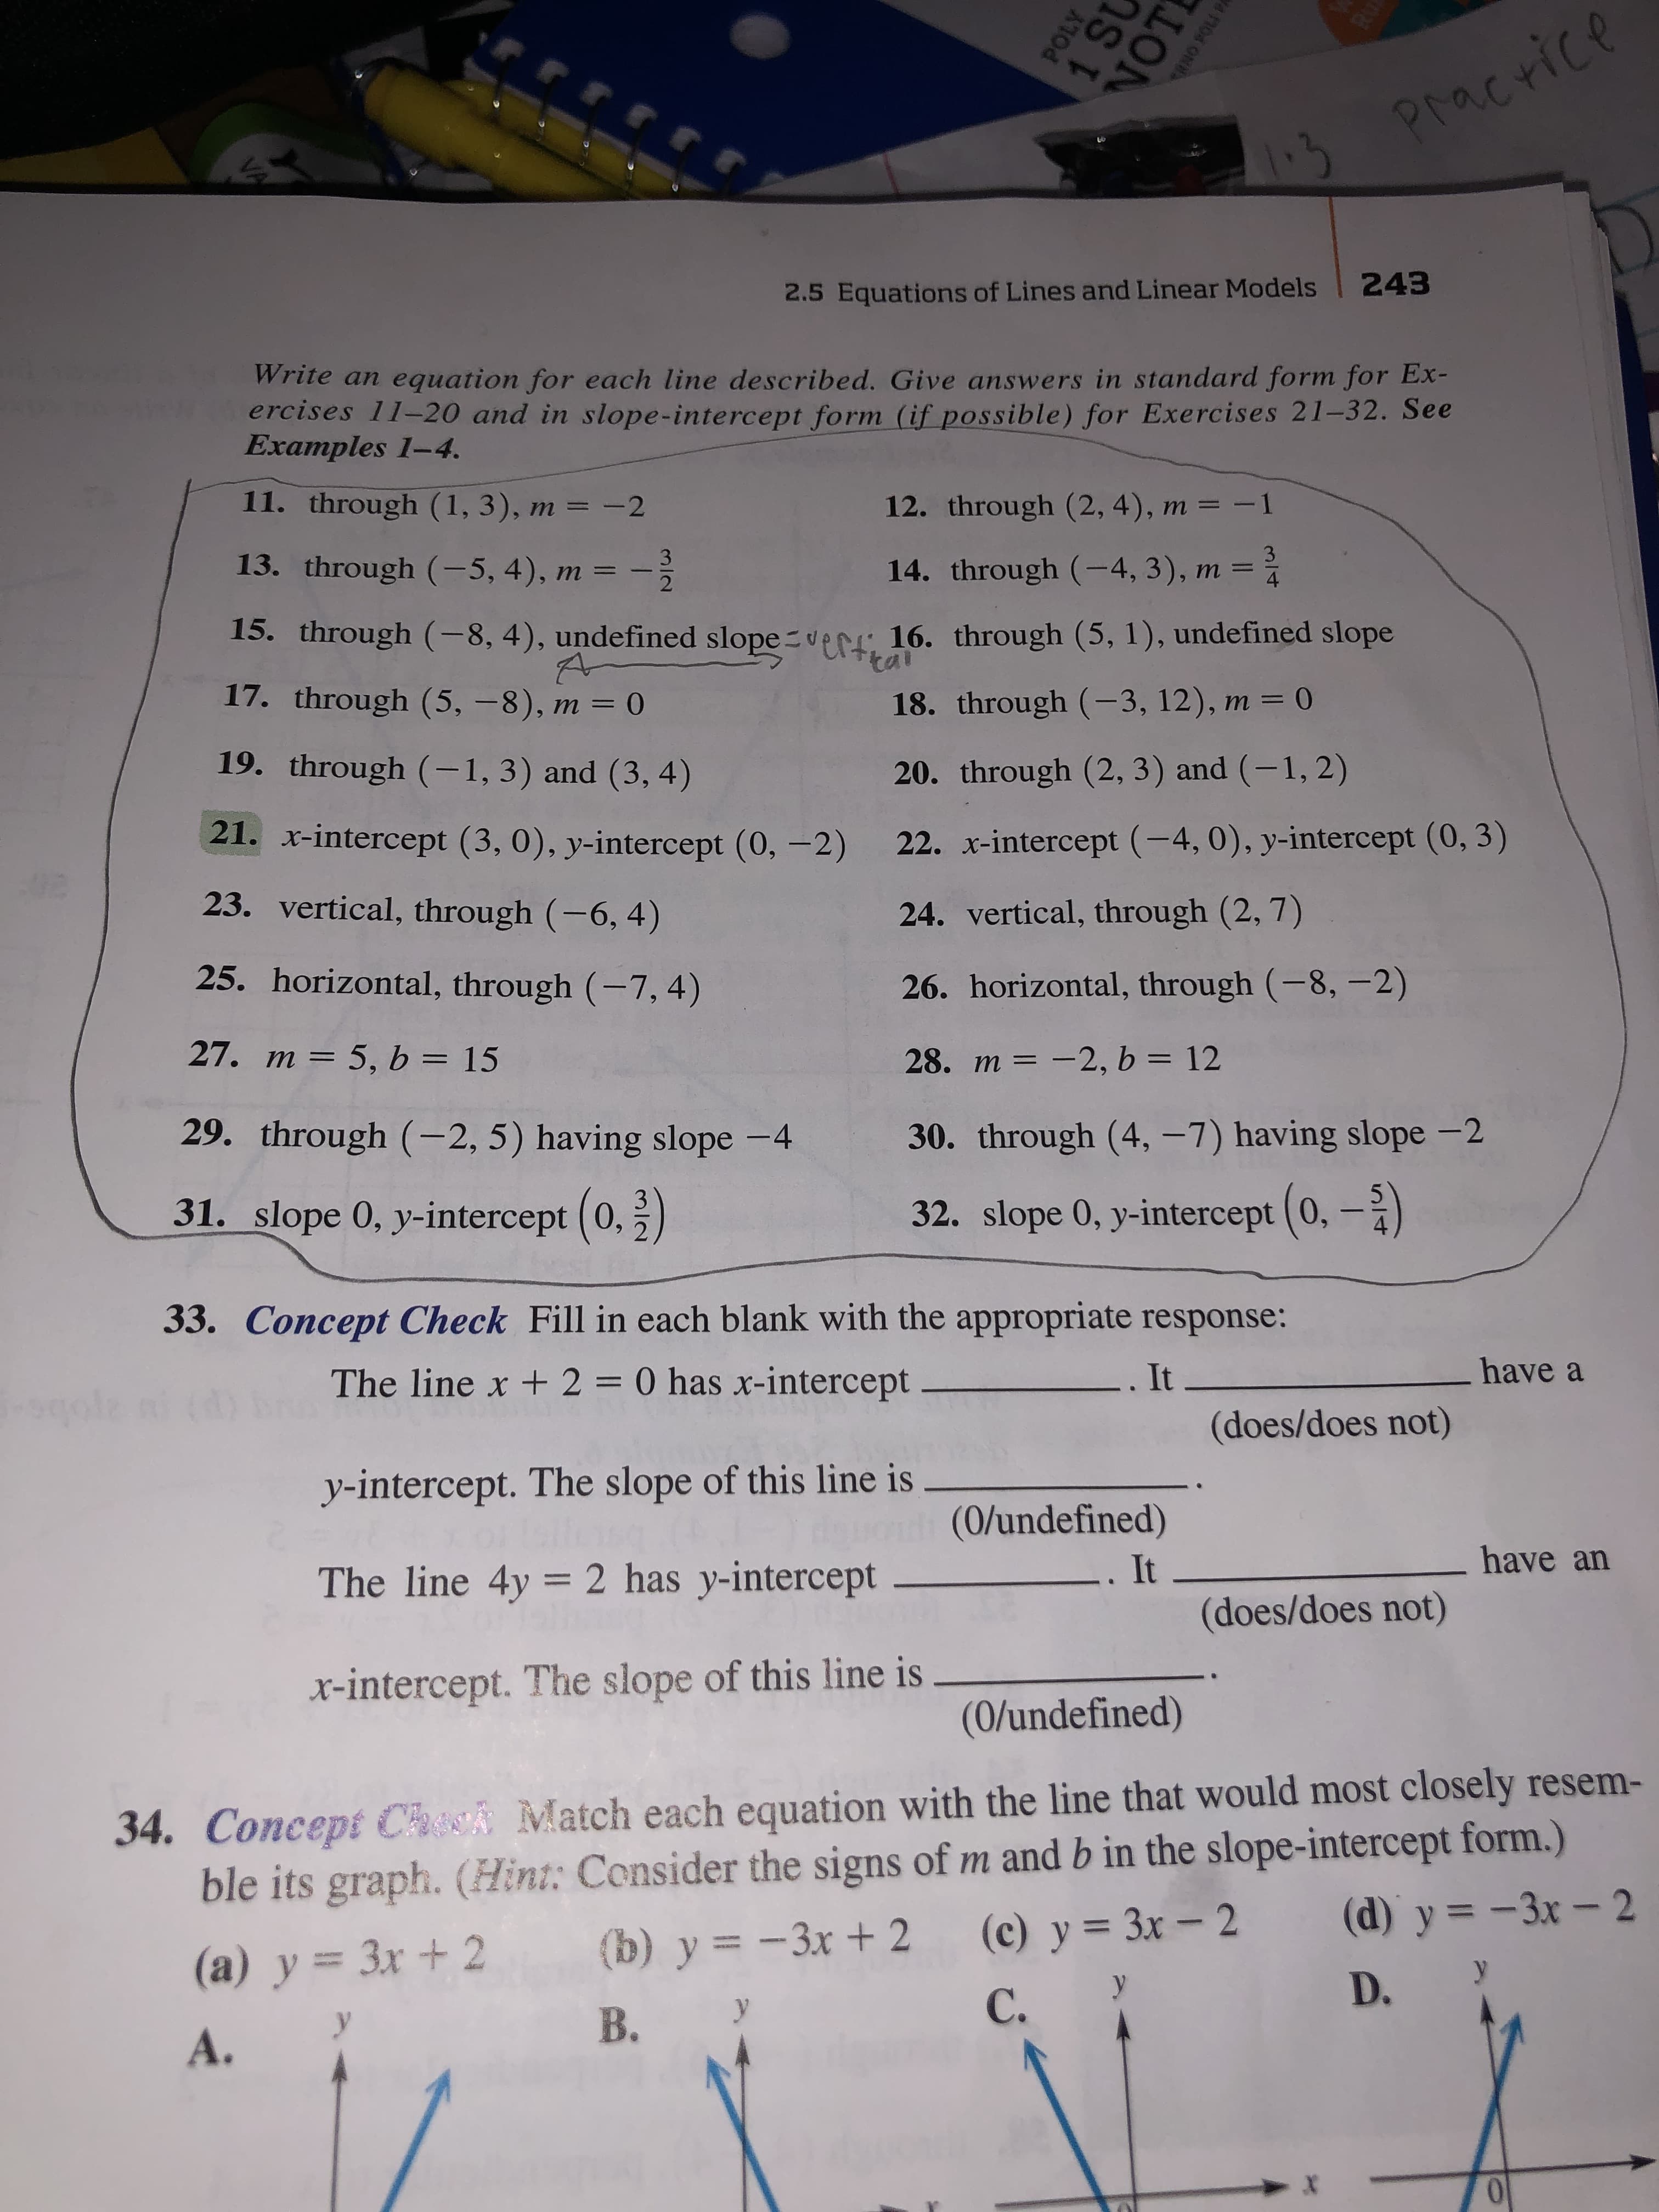 RU
rrrr
Pracrice
2.5 Equations of Lines and Linear Models 243
Write an equation for each line described. Give answers in standard form for Ex-
ercises 11-20 and in slope- intercept form (if possible) for Exercises 21-32. See
Examples 1-4.
11. through (1, 3), m = -2
12. through (2, 4), m = -1
3
13. through (-5, 4), m =
14. through (-4, 3), m =
2
4
15. through (-8, 4), undefined slope er 16. through (5, 1), undefined slope
tai
17. through (5, -8), m = 0
18. through (-3, 12), m = 0
19. through (-1, 3) and (3, 4)
20. through (2, 3) and (-1, 2)
21. x-intercept (3, 0), y-intercept (0,-2)
22. x-intercept (-4, 0), y-intercept (0, 3)
03
23. vertical, through (-6, 4)
24. vertical, through (2, 7)
25. horizontal, through (-7, 4)
26. horizontal, through (-8,-2)
27. m 5, b = 15
28. m -2, b = 12
29. through (-2, 5) having slope -4
30. through (4, -7) having slope -2
31. slope 0, y-intercept (0, 2)
32. slope 0, y-intercept (0,-2
33. Concept Check Fill in each blank with the appropriate response:
The line x + 2 = 0 has x-intercept
It
have
(does/does not)
y-intercept. The slope of this line is
(0/undefined)
The line 4y 2 has y-intercept_
have an
It
(does/does not)
x-intercept. The slope of this line is
(0/undefined)
34. Concept Check Match each equation with the line that would most closely resem-
ble its graph. (Hint: Consider the signs of m and b in the slope-intercept form.)
(b) y-3x+ 2
(d) y-3x - 2
(c) y 3x- 2
(a) y 3x+ 2
у
D.
С.
В.
А.
POLY
1 St
VOT
141Cs omEs
